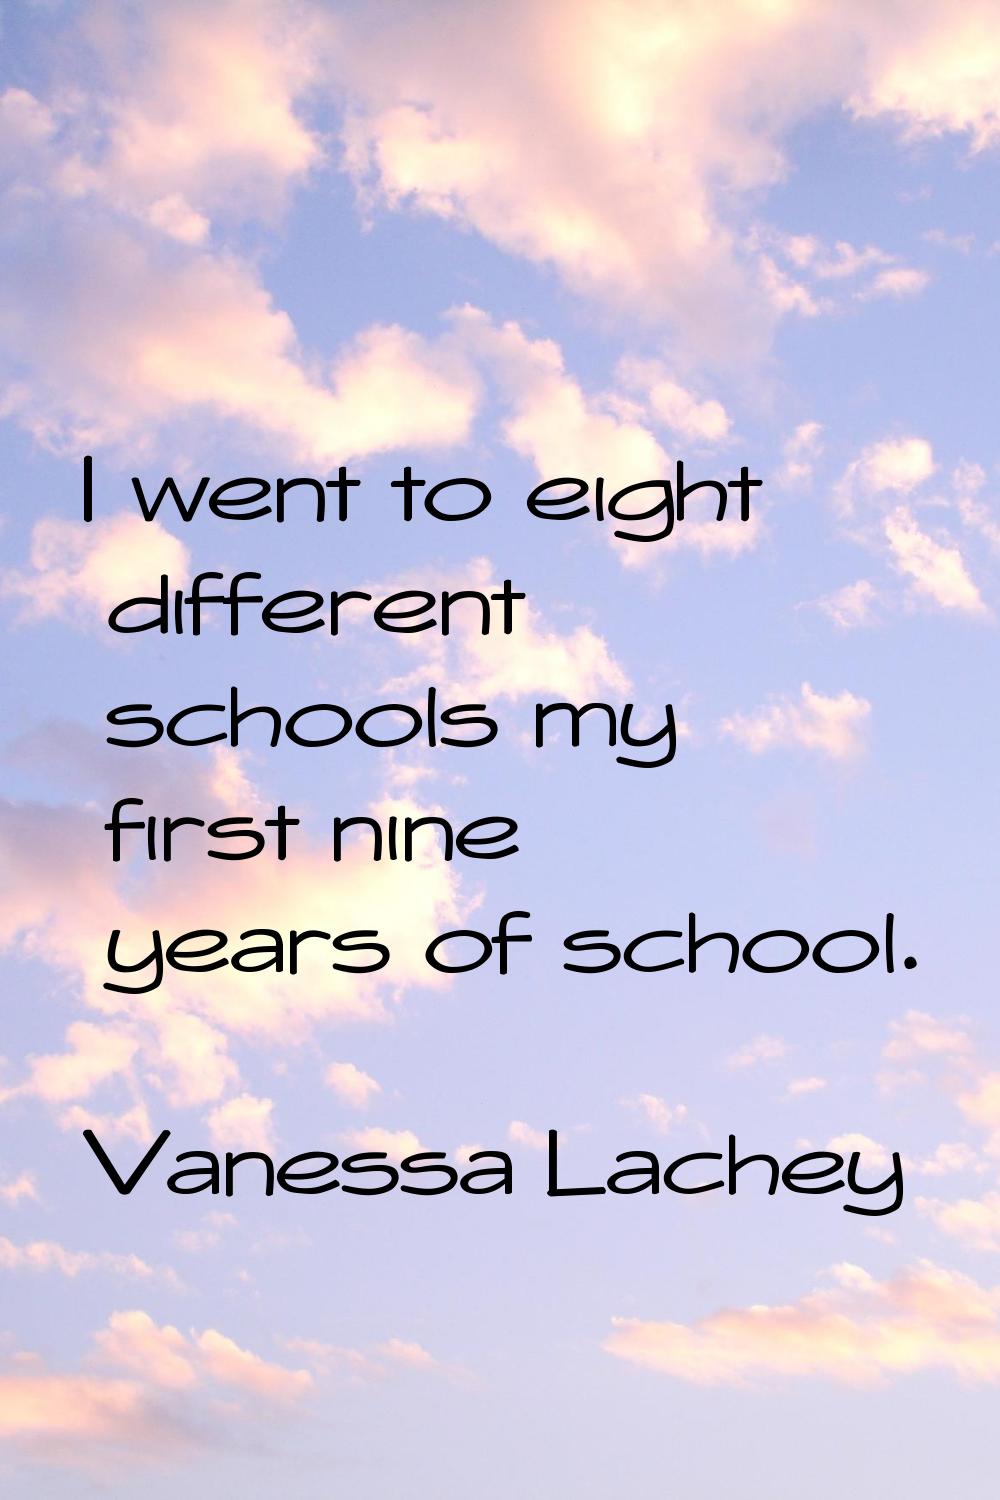 I went to eight different schools my first nine years of school.